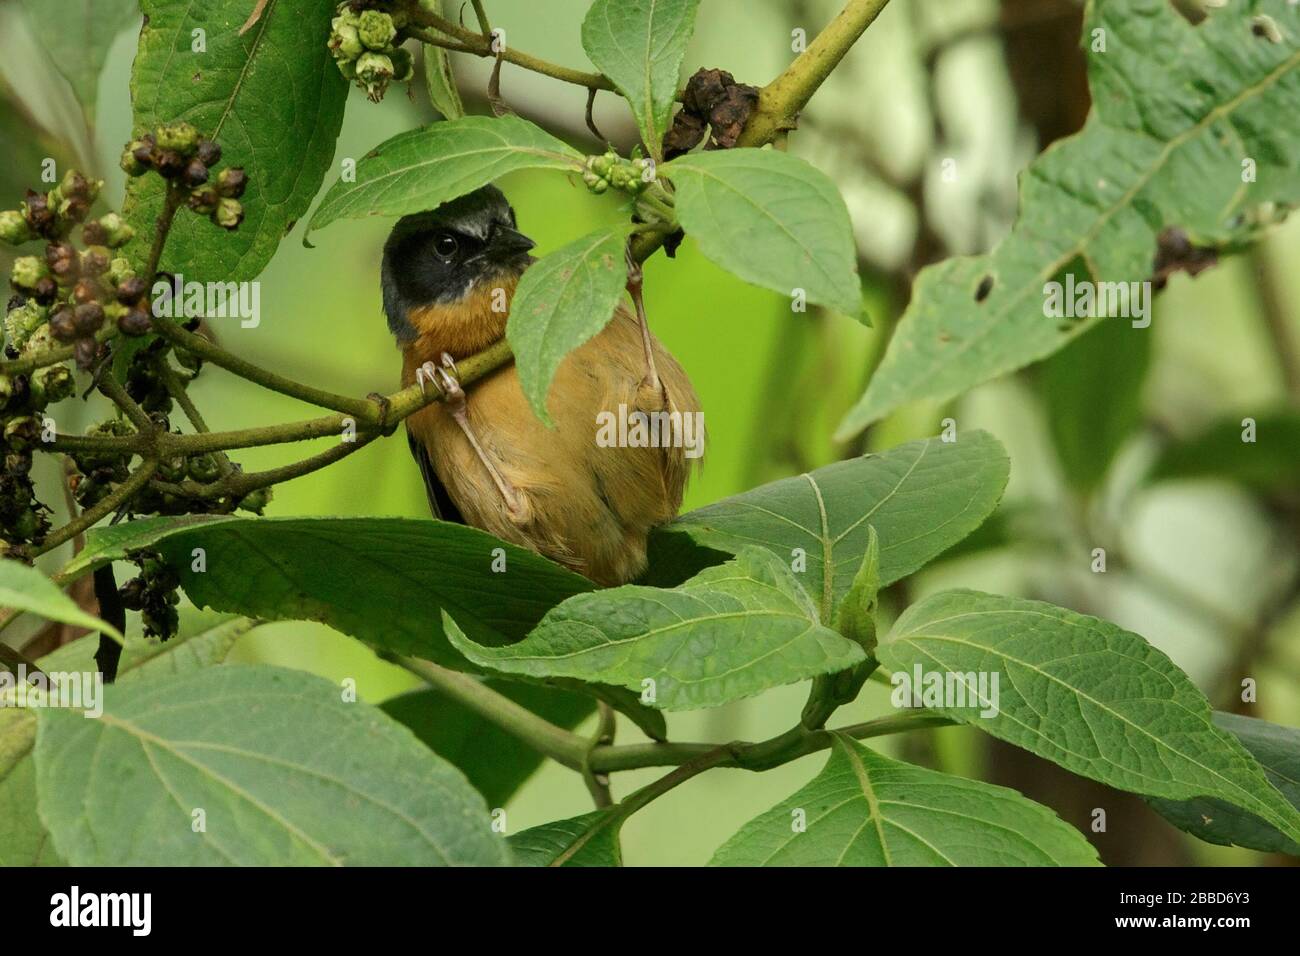 Black-eared Hemispingus (Sphenopsis melanotis) perched on a branch in the Andes mountains in Colombia. Stock Photo